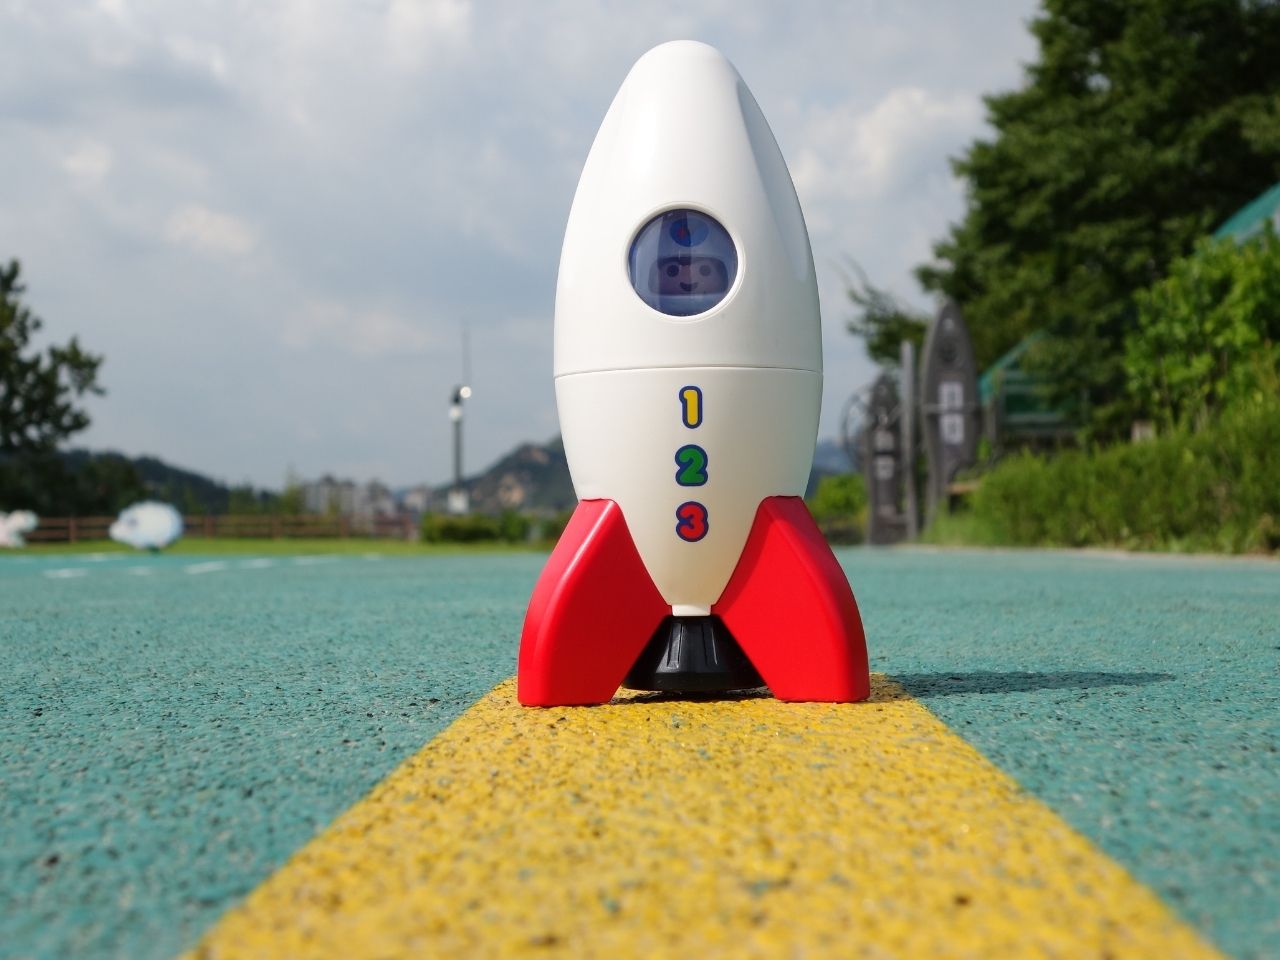 Colored toy rocket ship